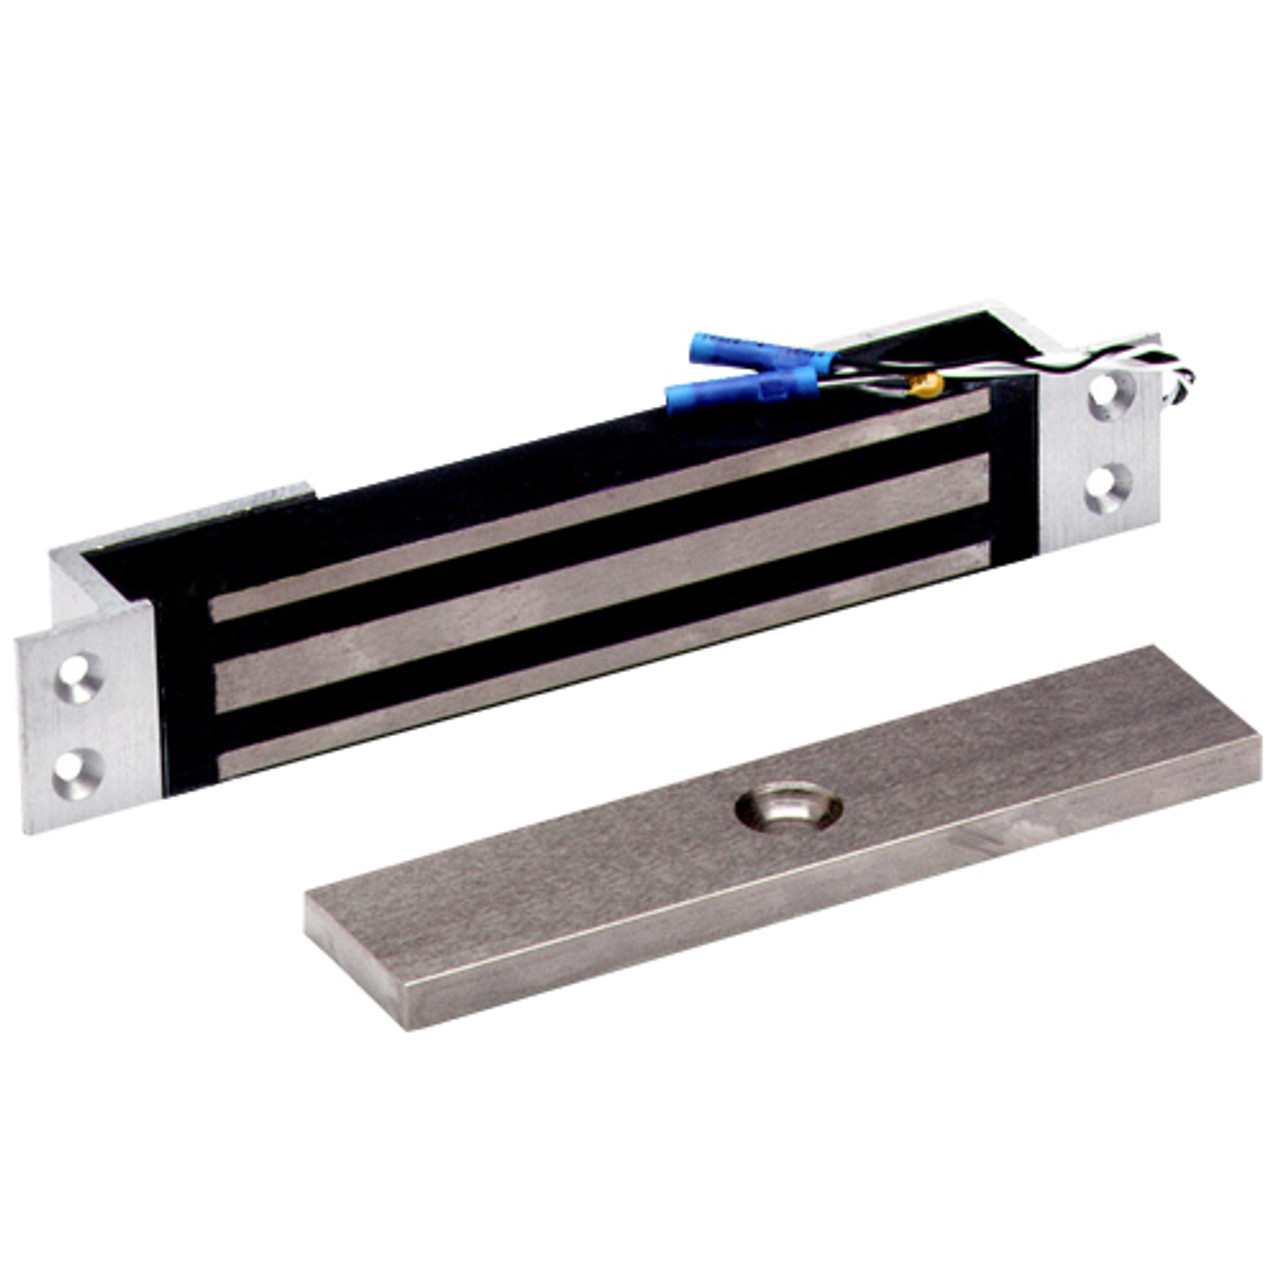 2600-MB-US28 DynaLock 2600 Series 650 LBs Single Mortise Mini Electromagnetic Lock with Mounting Brackets in Satin Aluminum